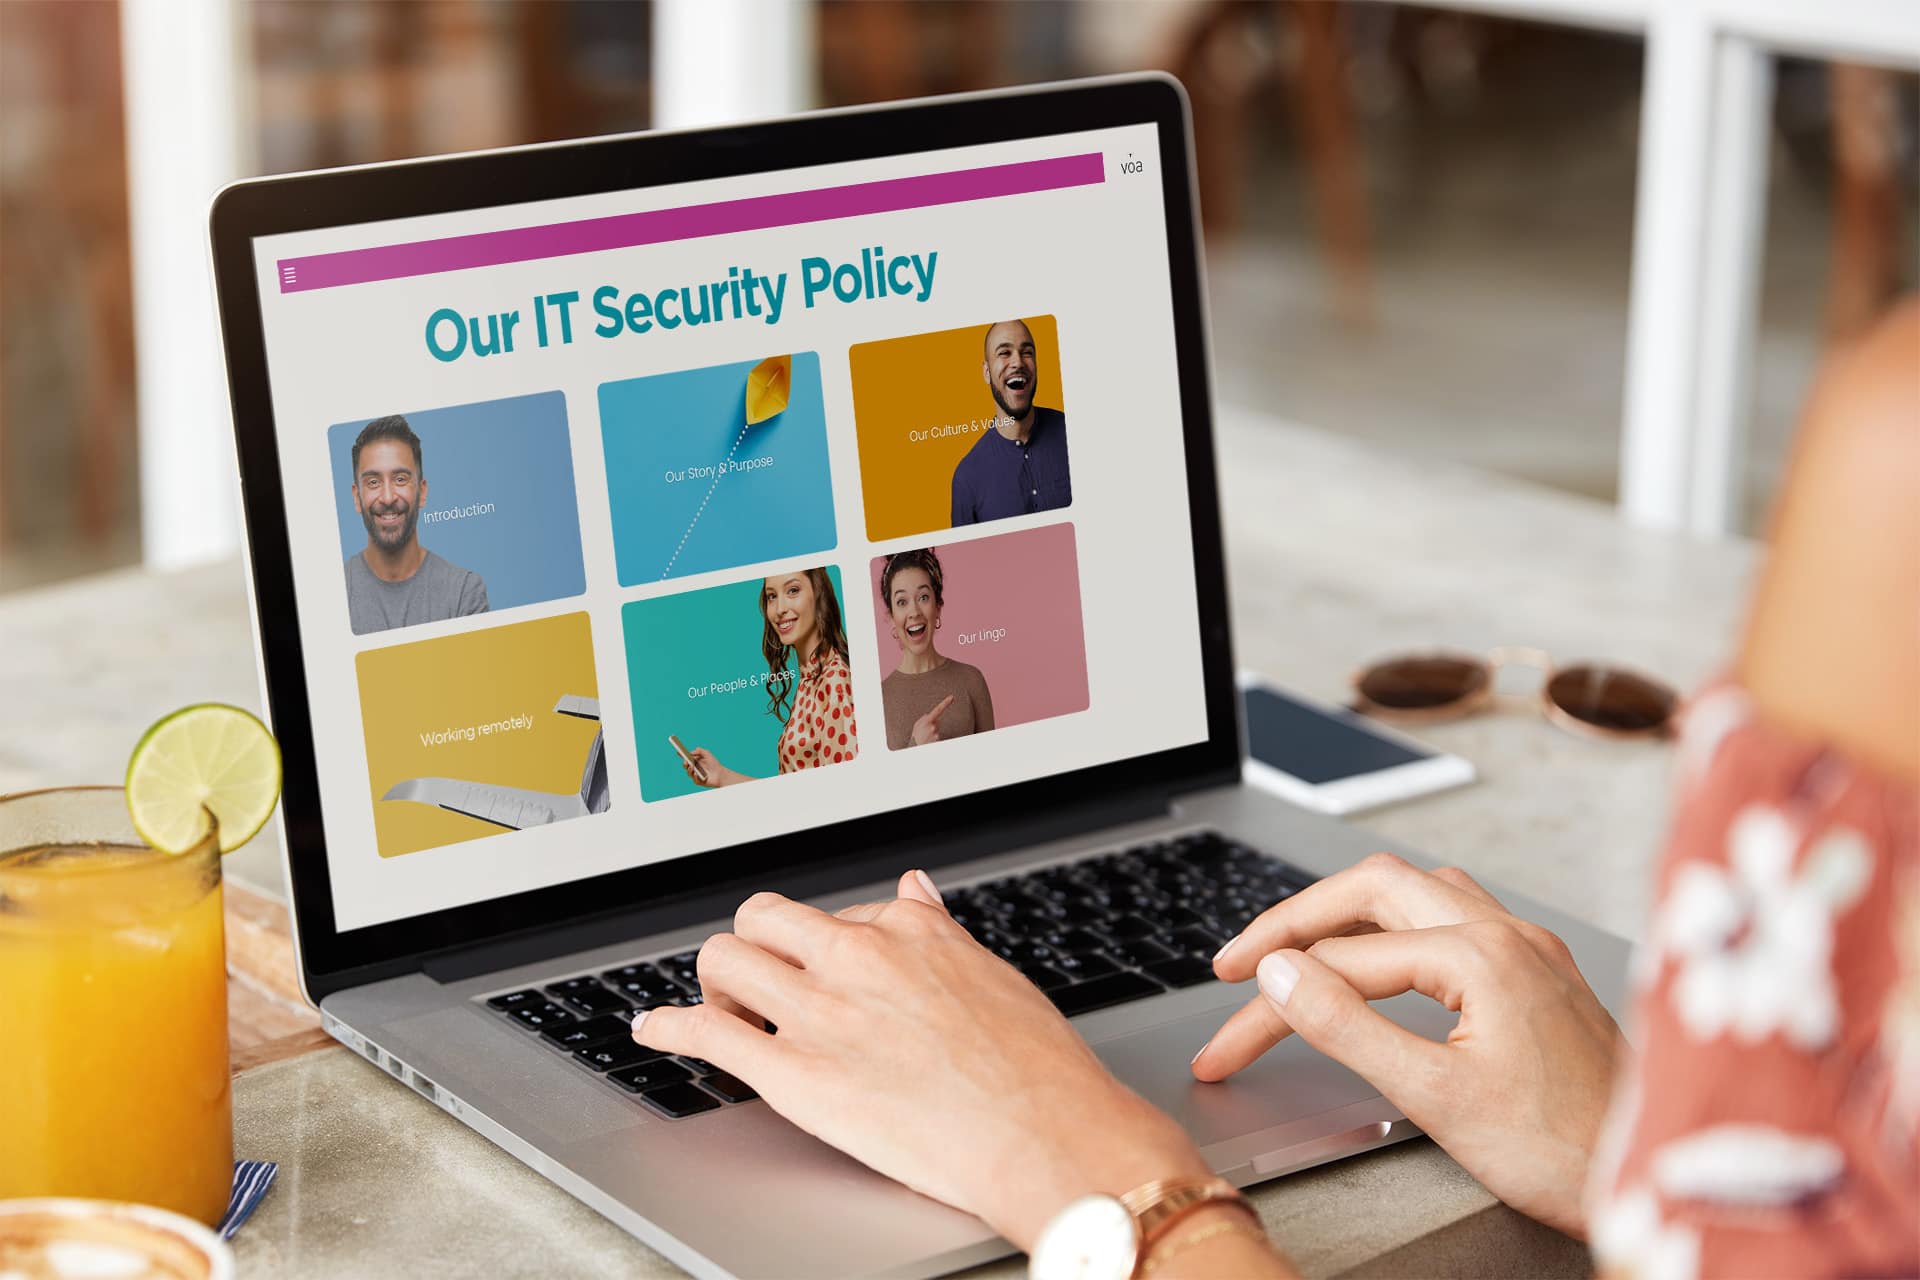 Promoting Information Security Policy to employees